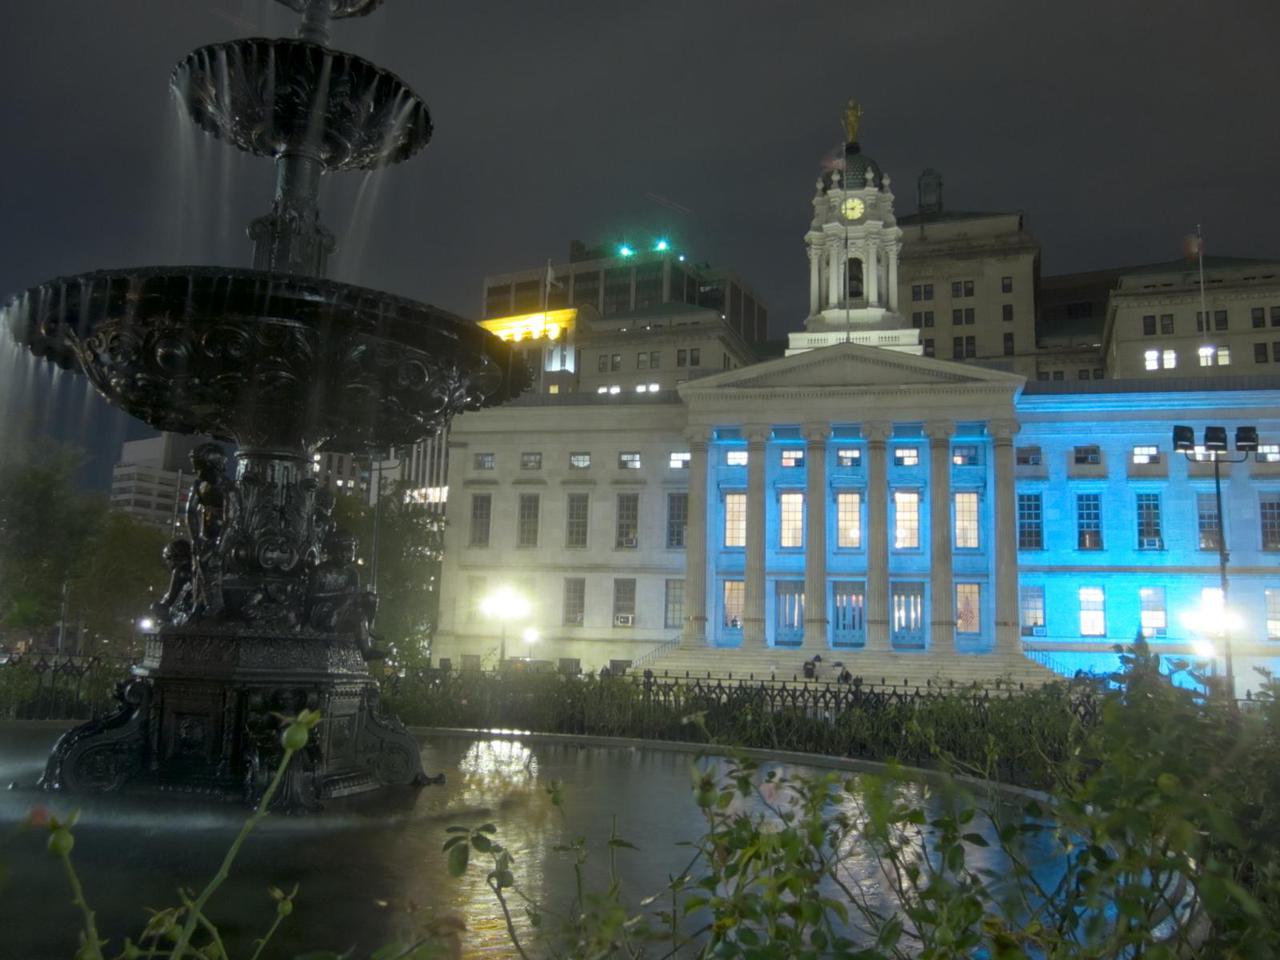 brooklyn borough hall at night, with a fountain in the foreground